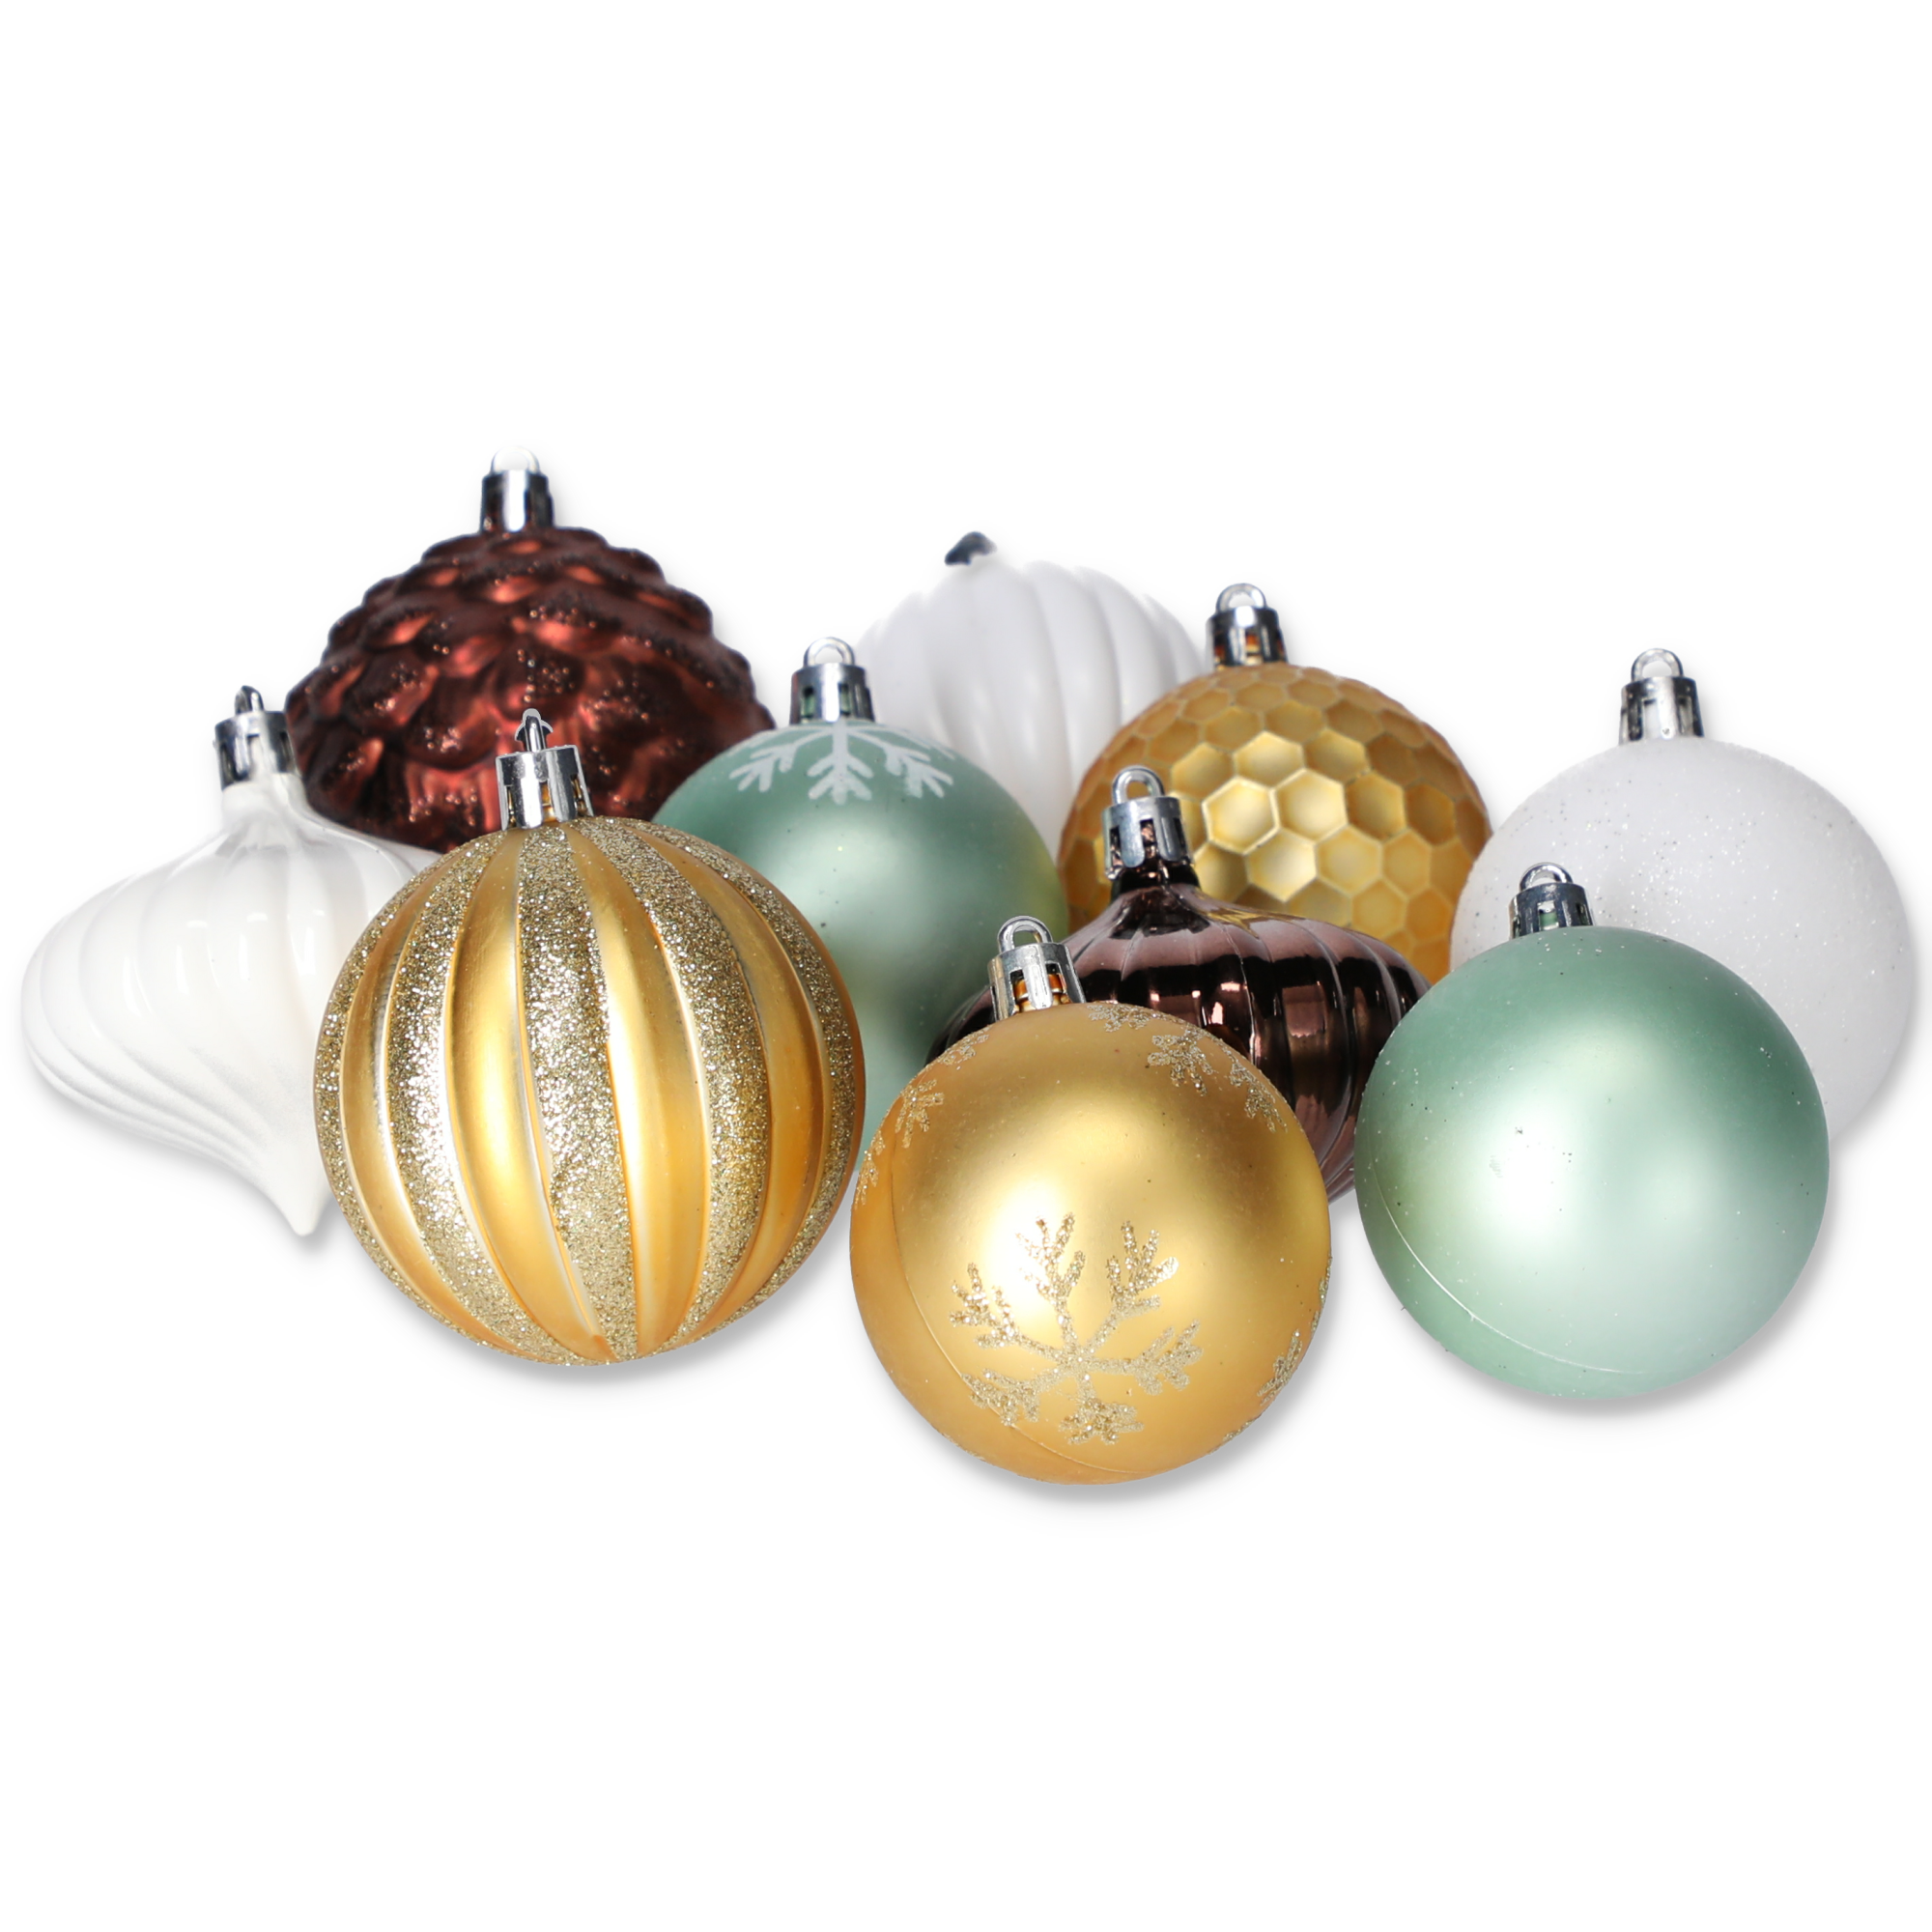 Christbaumkugeln mint/gold/kupfer/weiß, 60-teilig + product picture